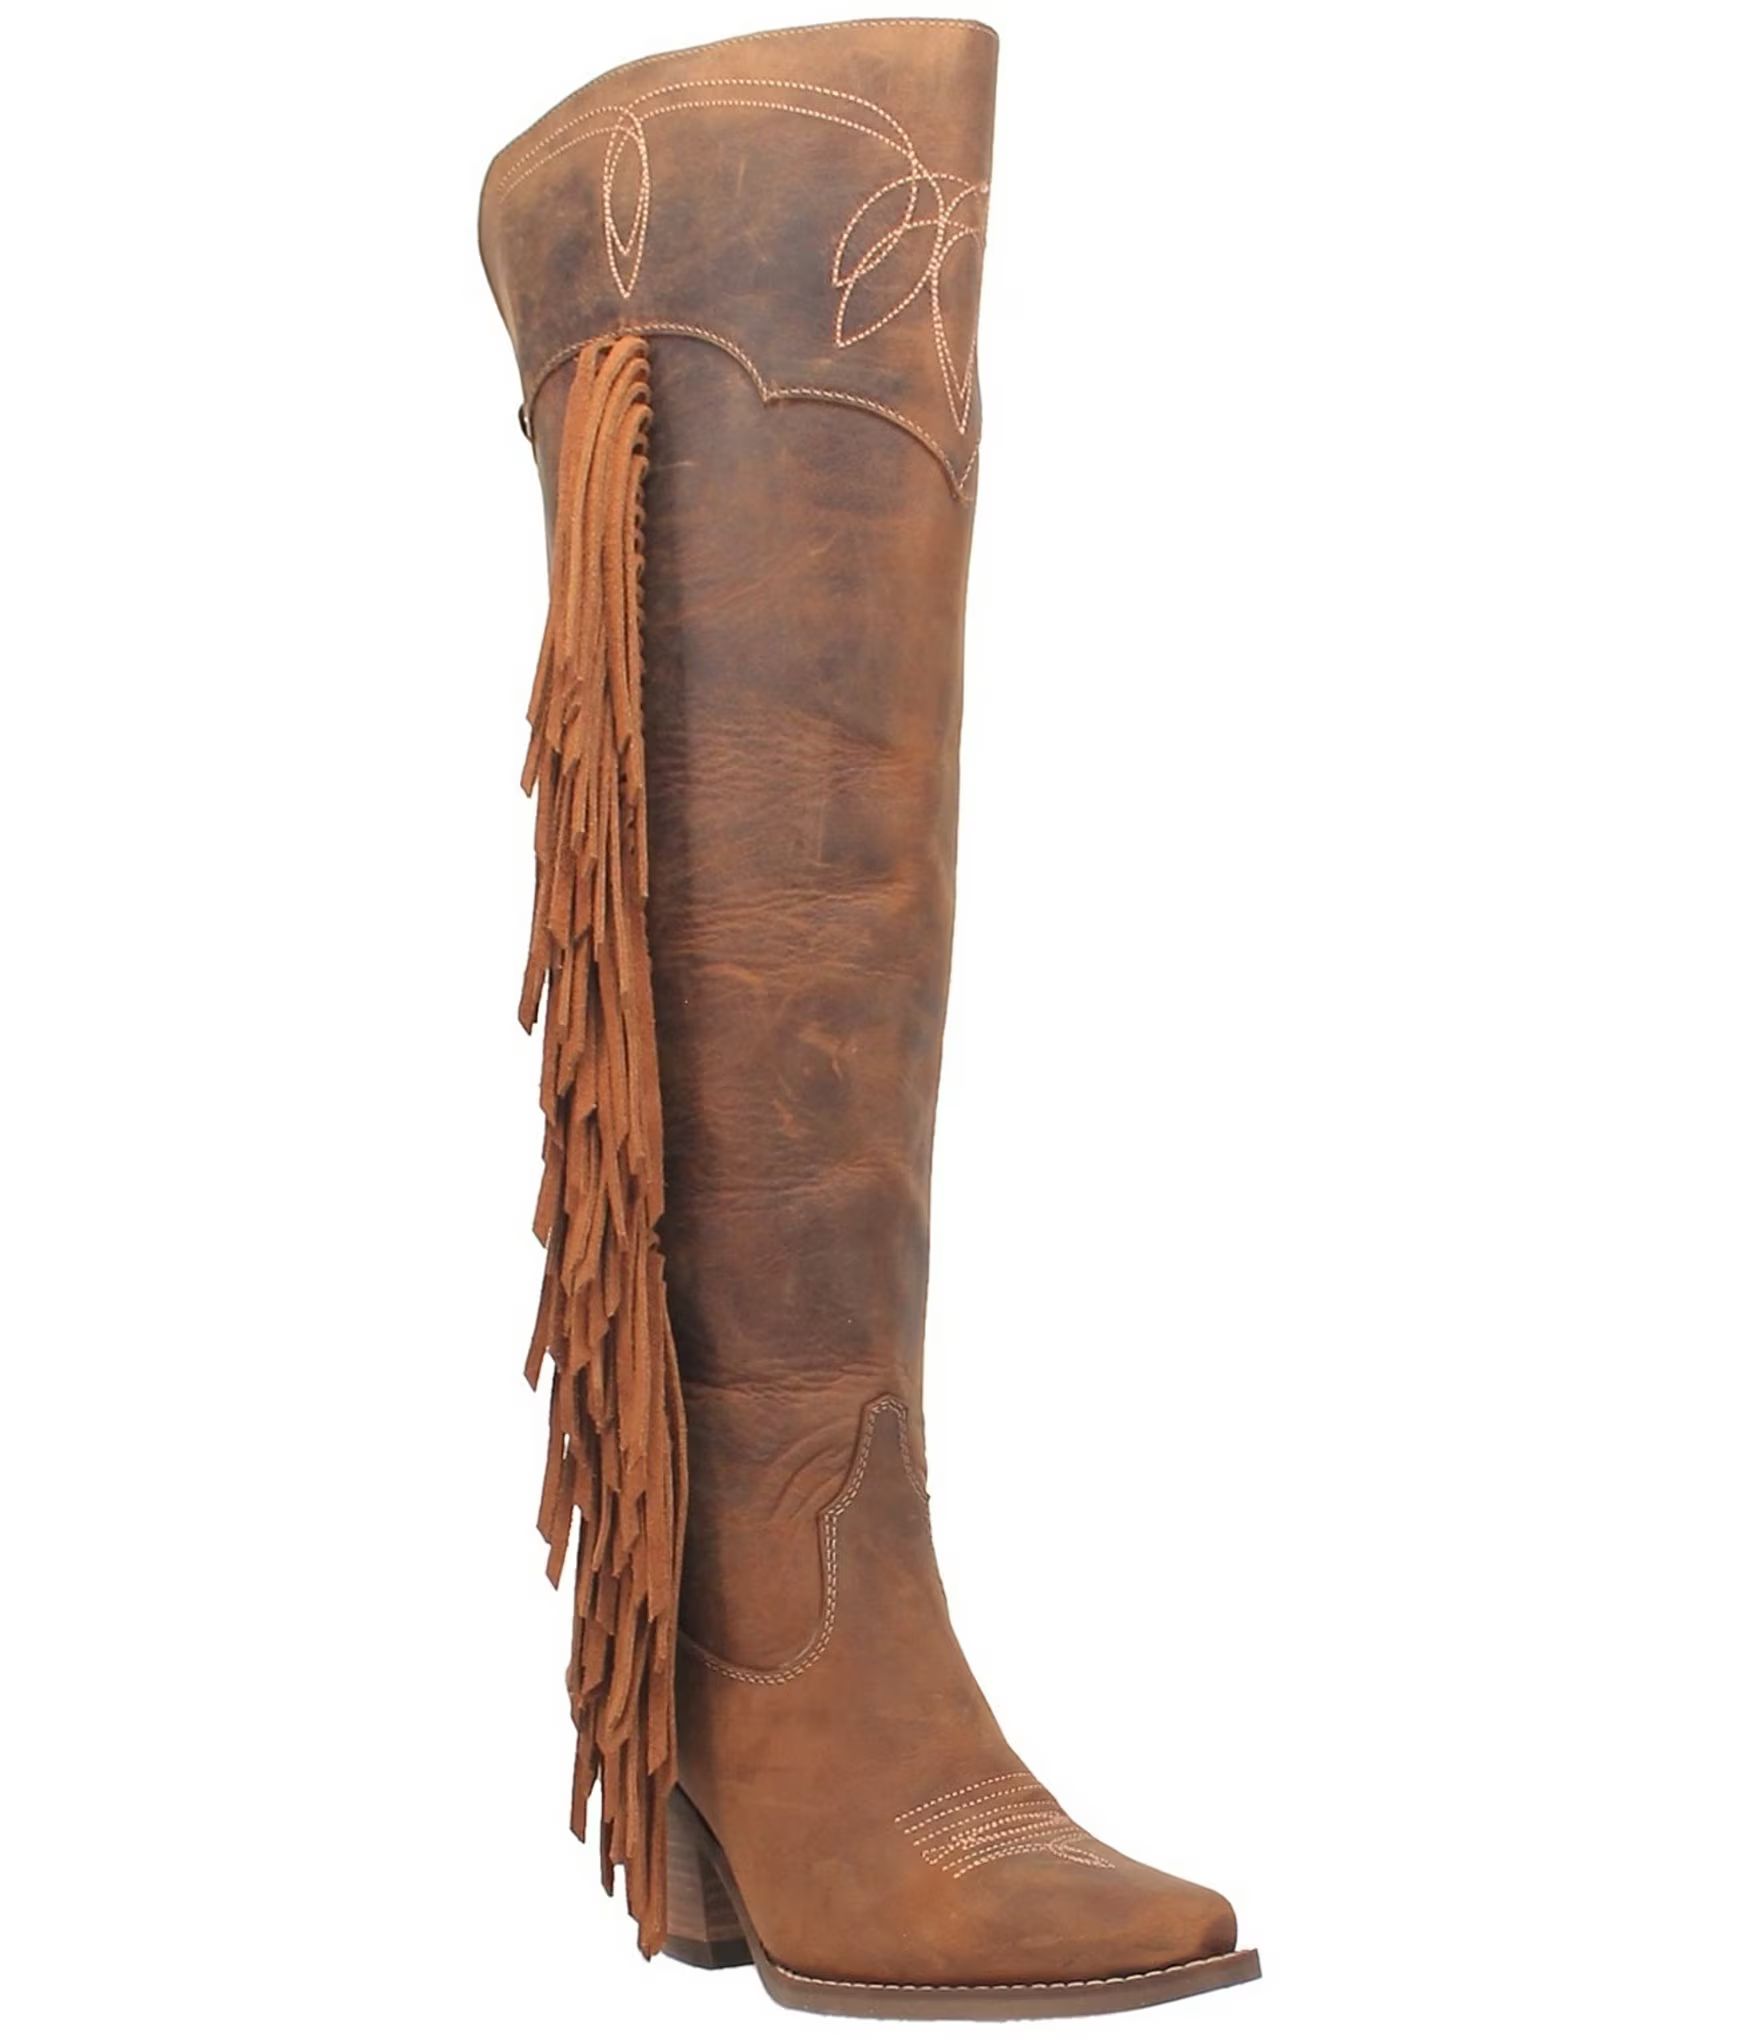 Sky High Over The Knee Distressed Leather Fringe Western Boots | Dillard's